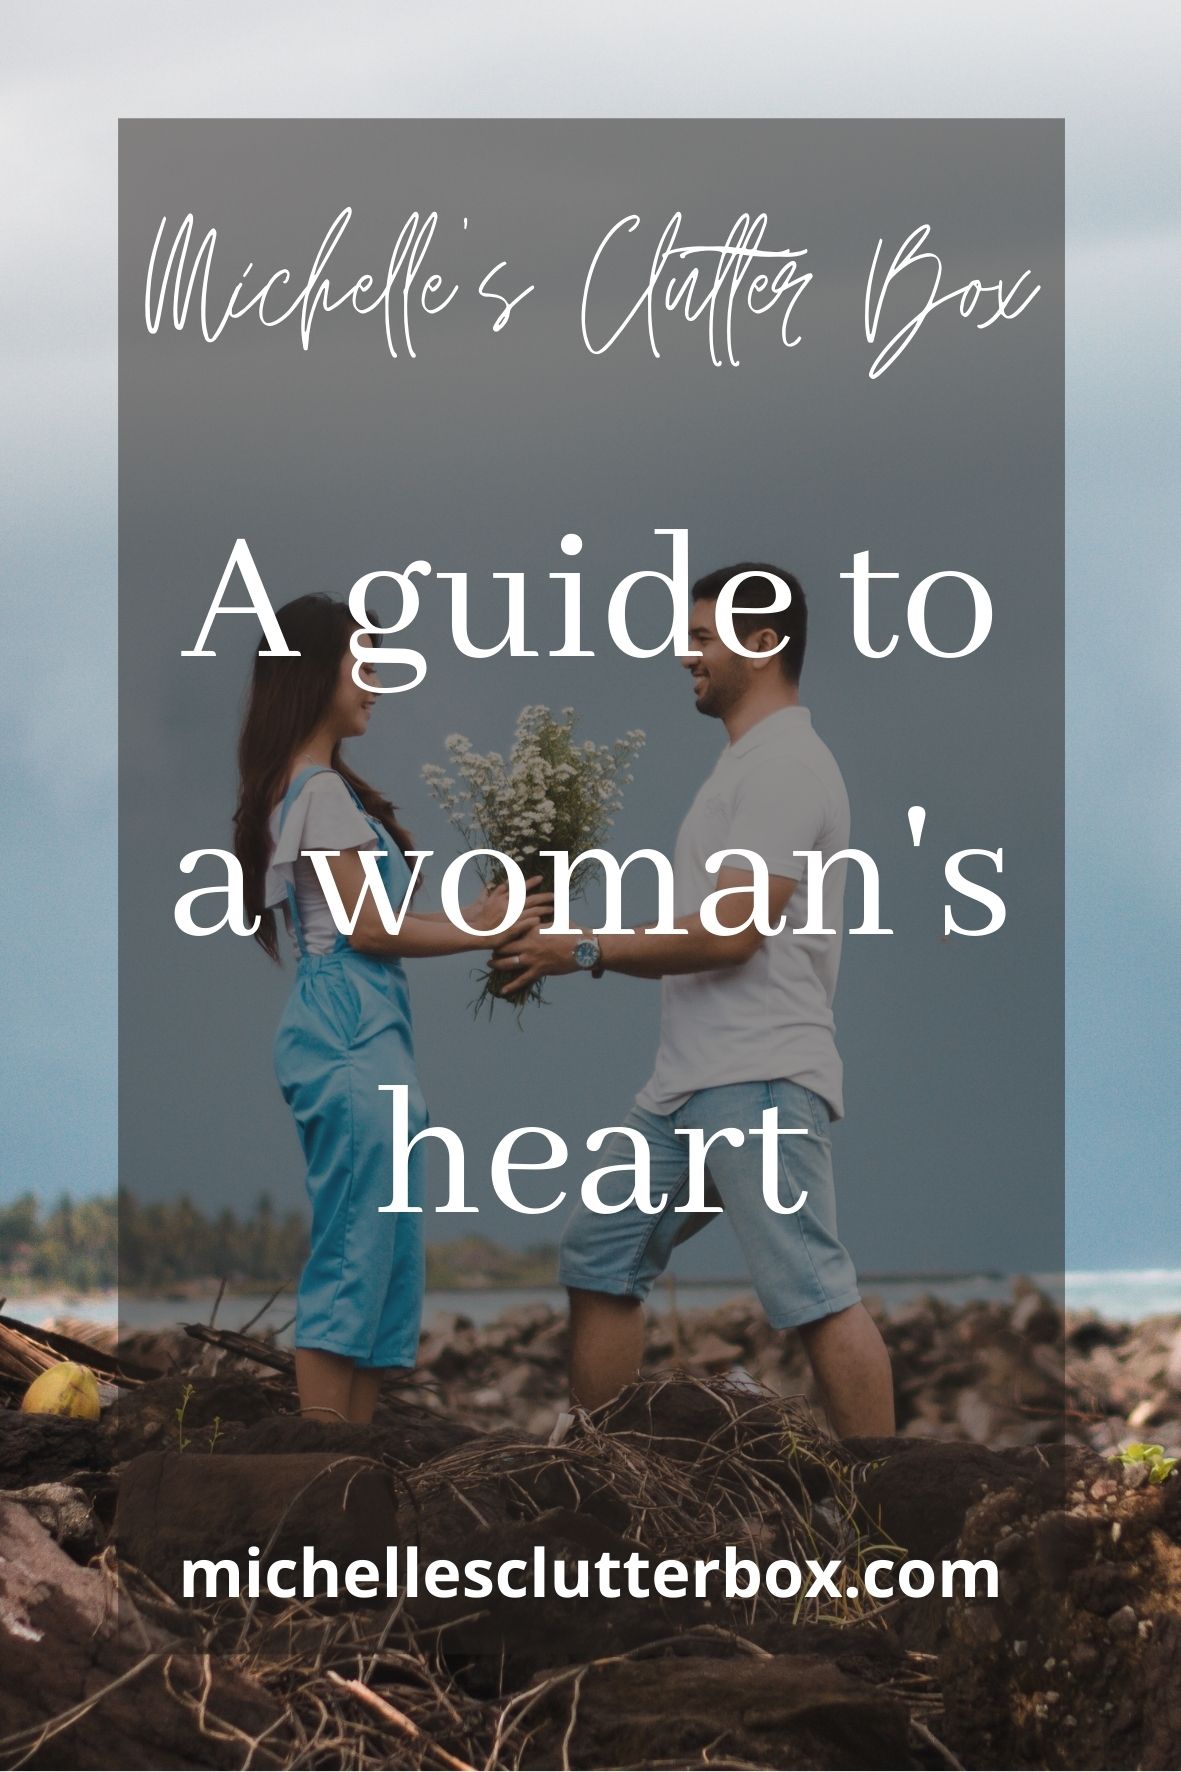 A guide to a woman's heart